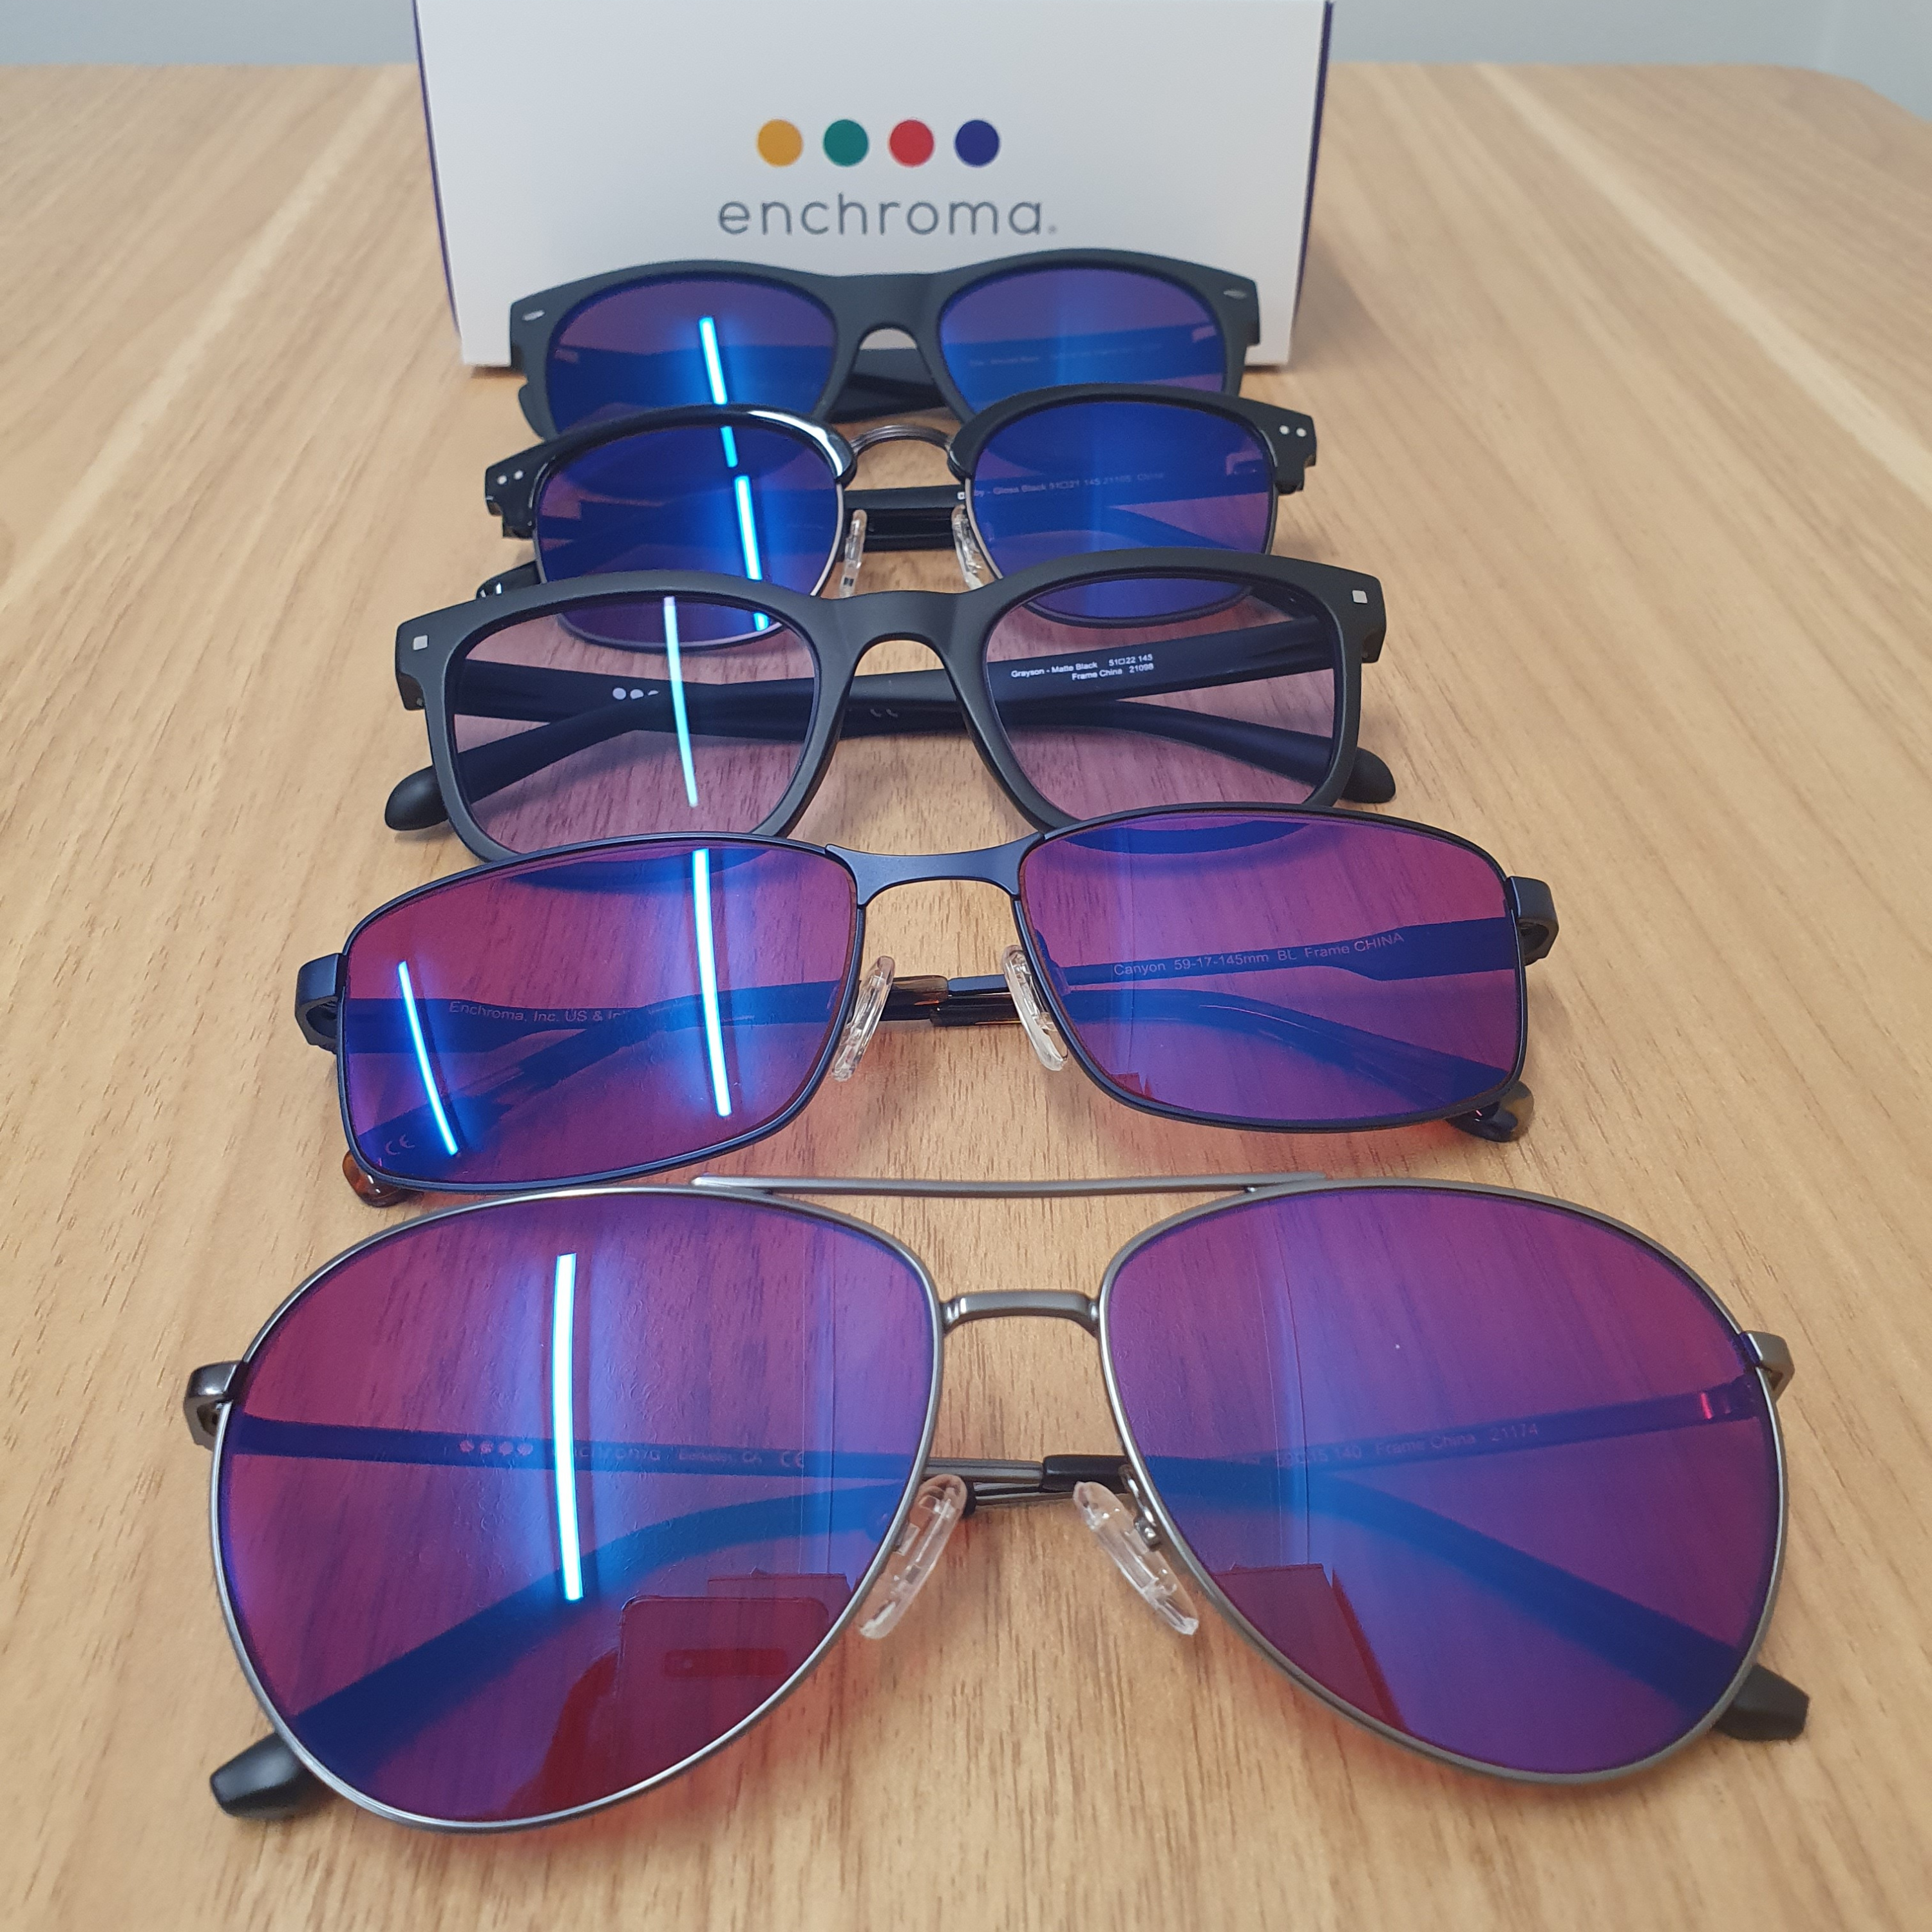 Image of 5 pairs of EnChroma Colour Blindness Glasses in a vertial row with the enchroma presentation box behind them